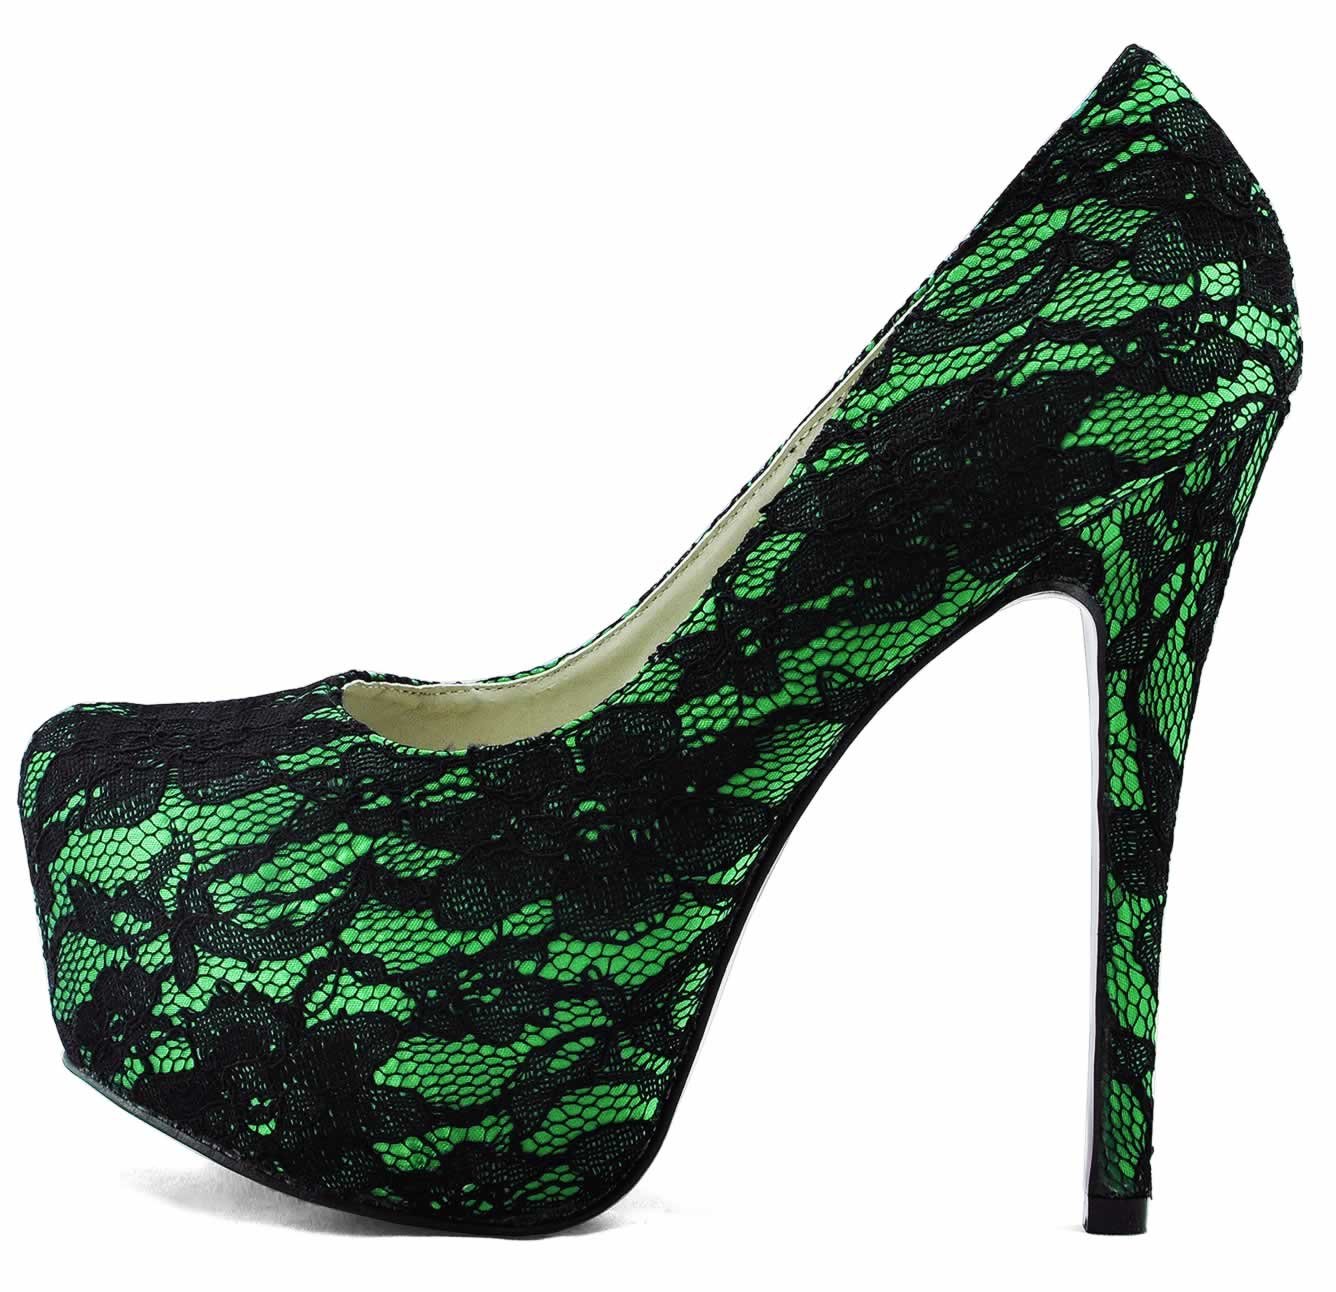 Home Women's Shoes LSS00125 - Green Lace Covered Platform Court Shoes